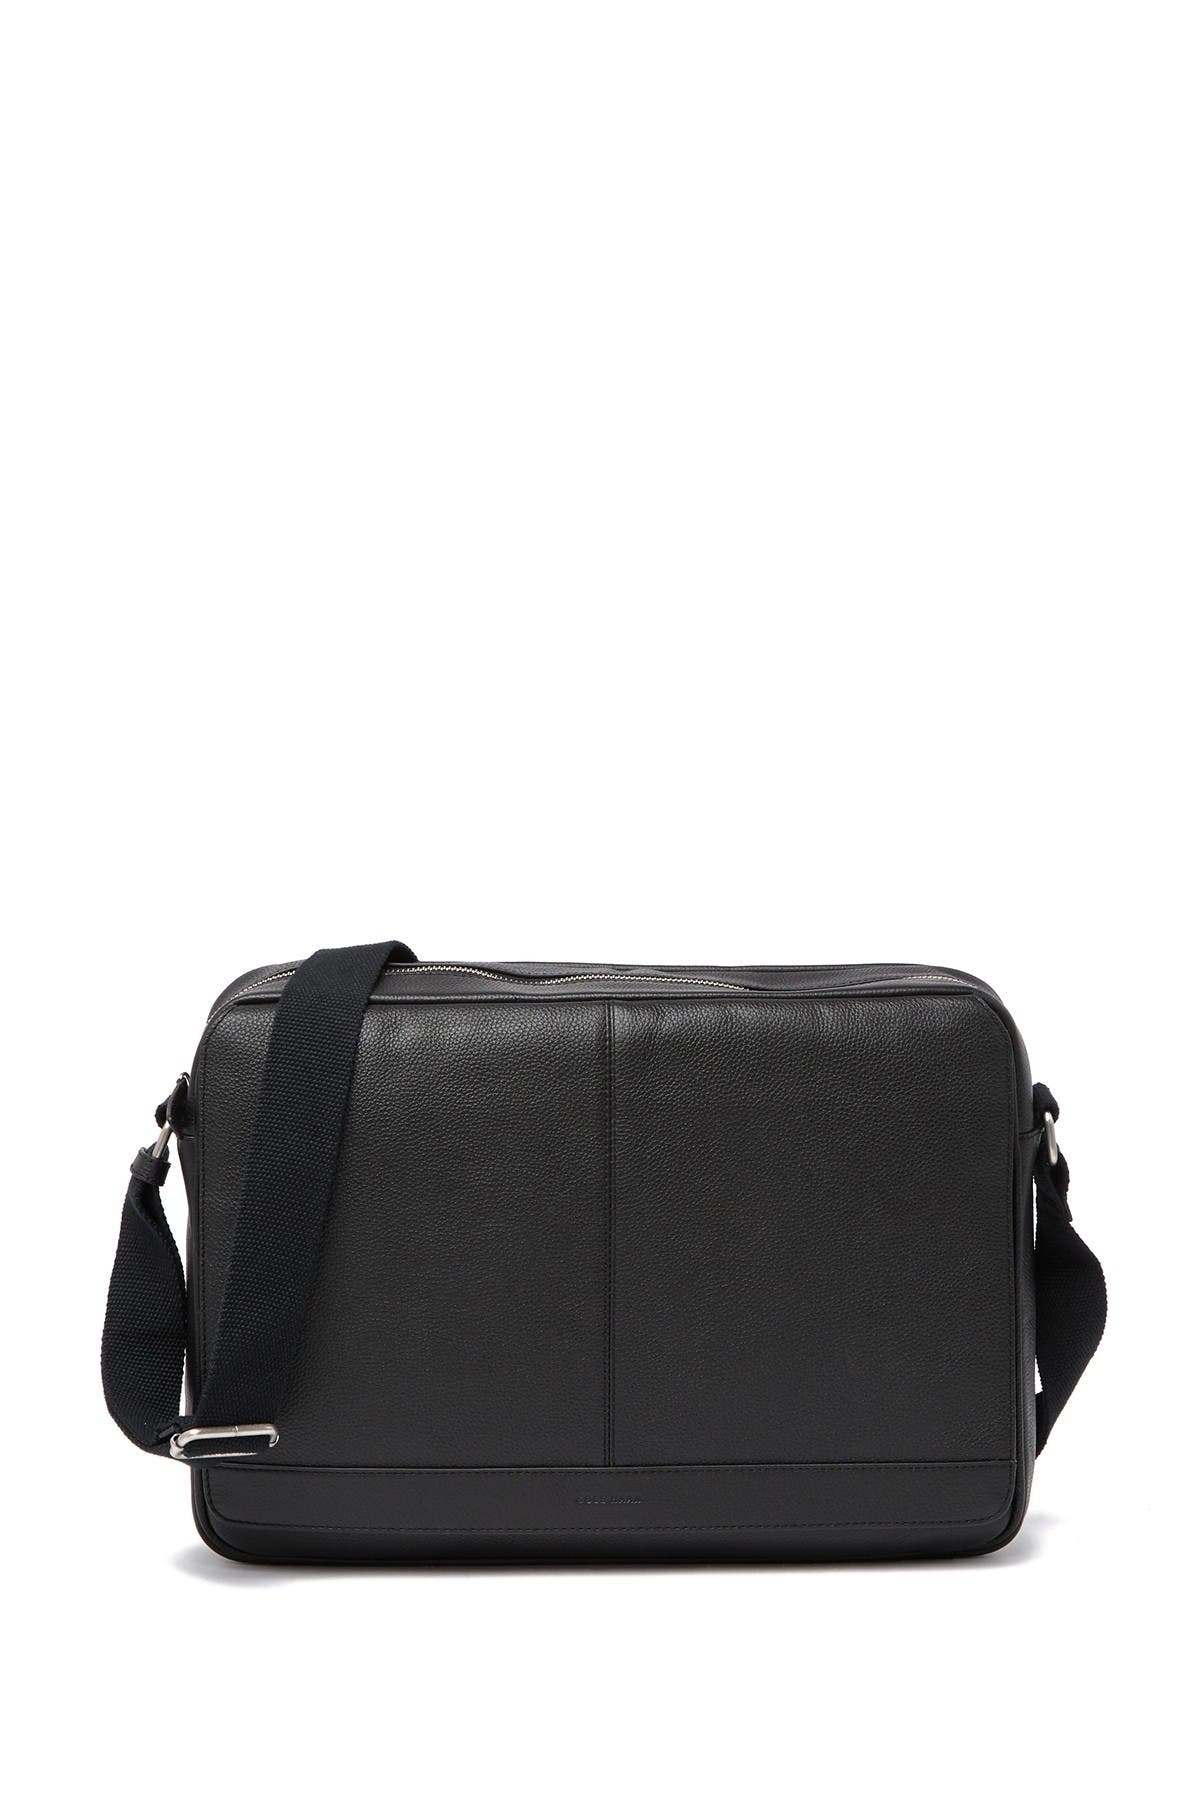 cole haan laptop tote